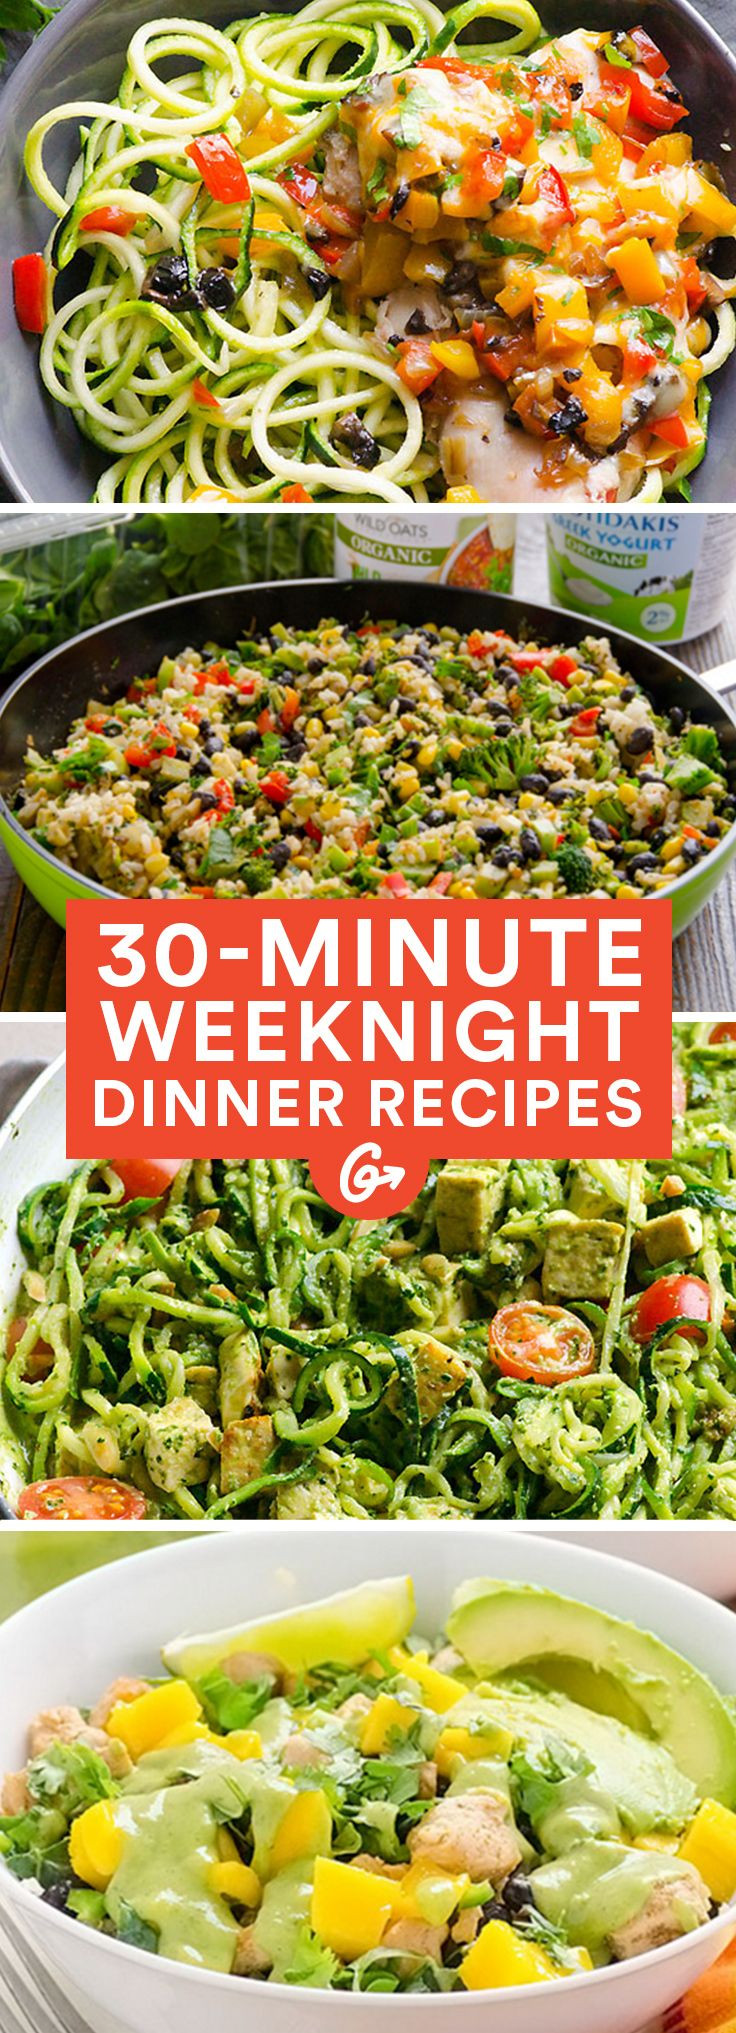 Healthy Weeknight Dinners For Families
 Best 25 Cheap healthy food ideas on Pinterest